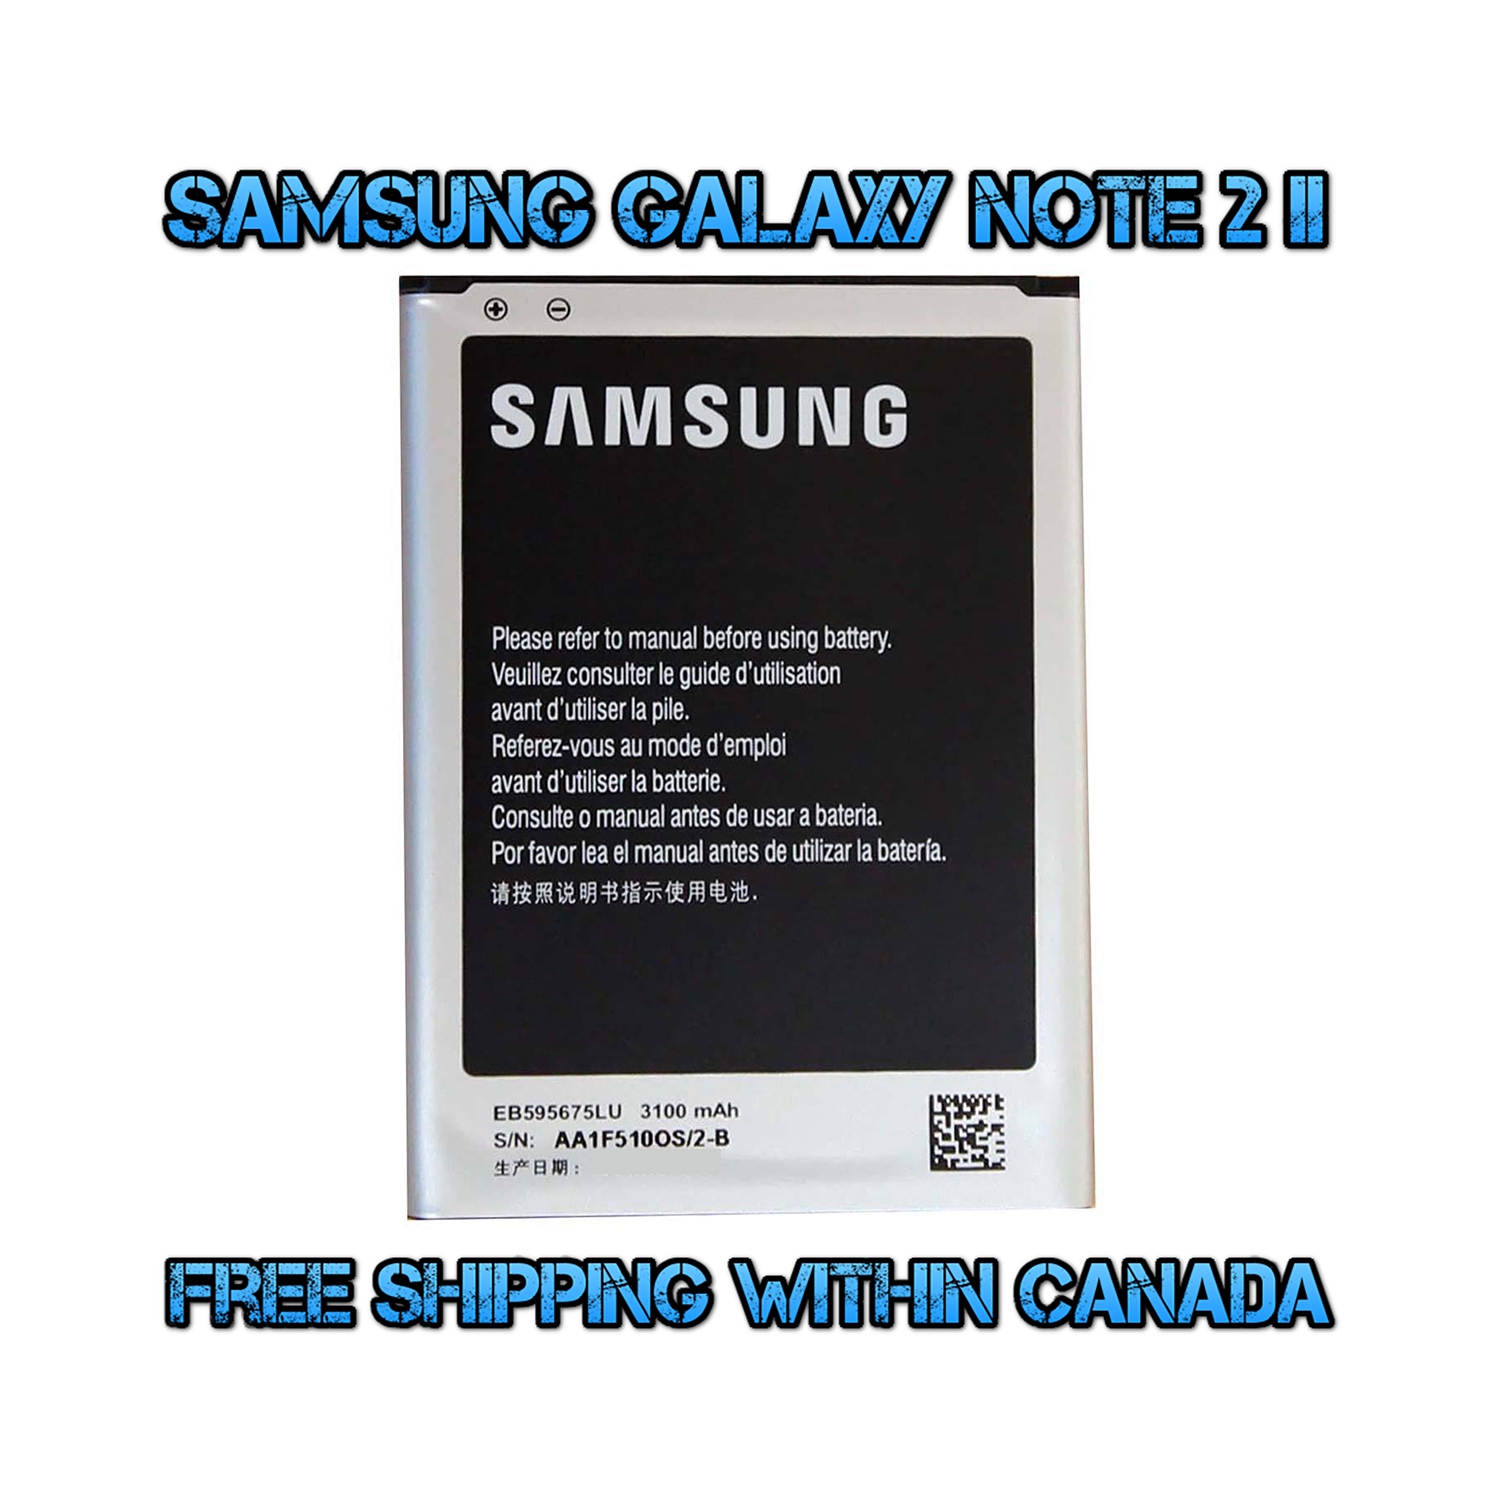 New OEM Replacement Battery Model EB595675LU 3100 mAh for Samsung Galaxy Note 2 II N7100 N7105 i317 - (FREE SHIPPING)